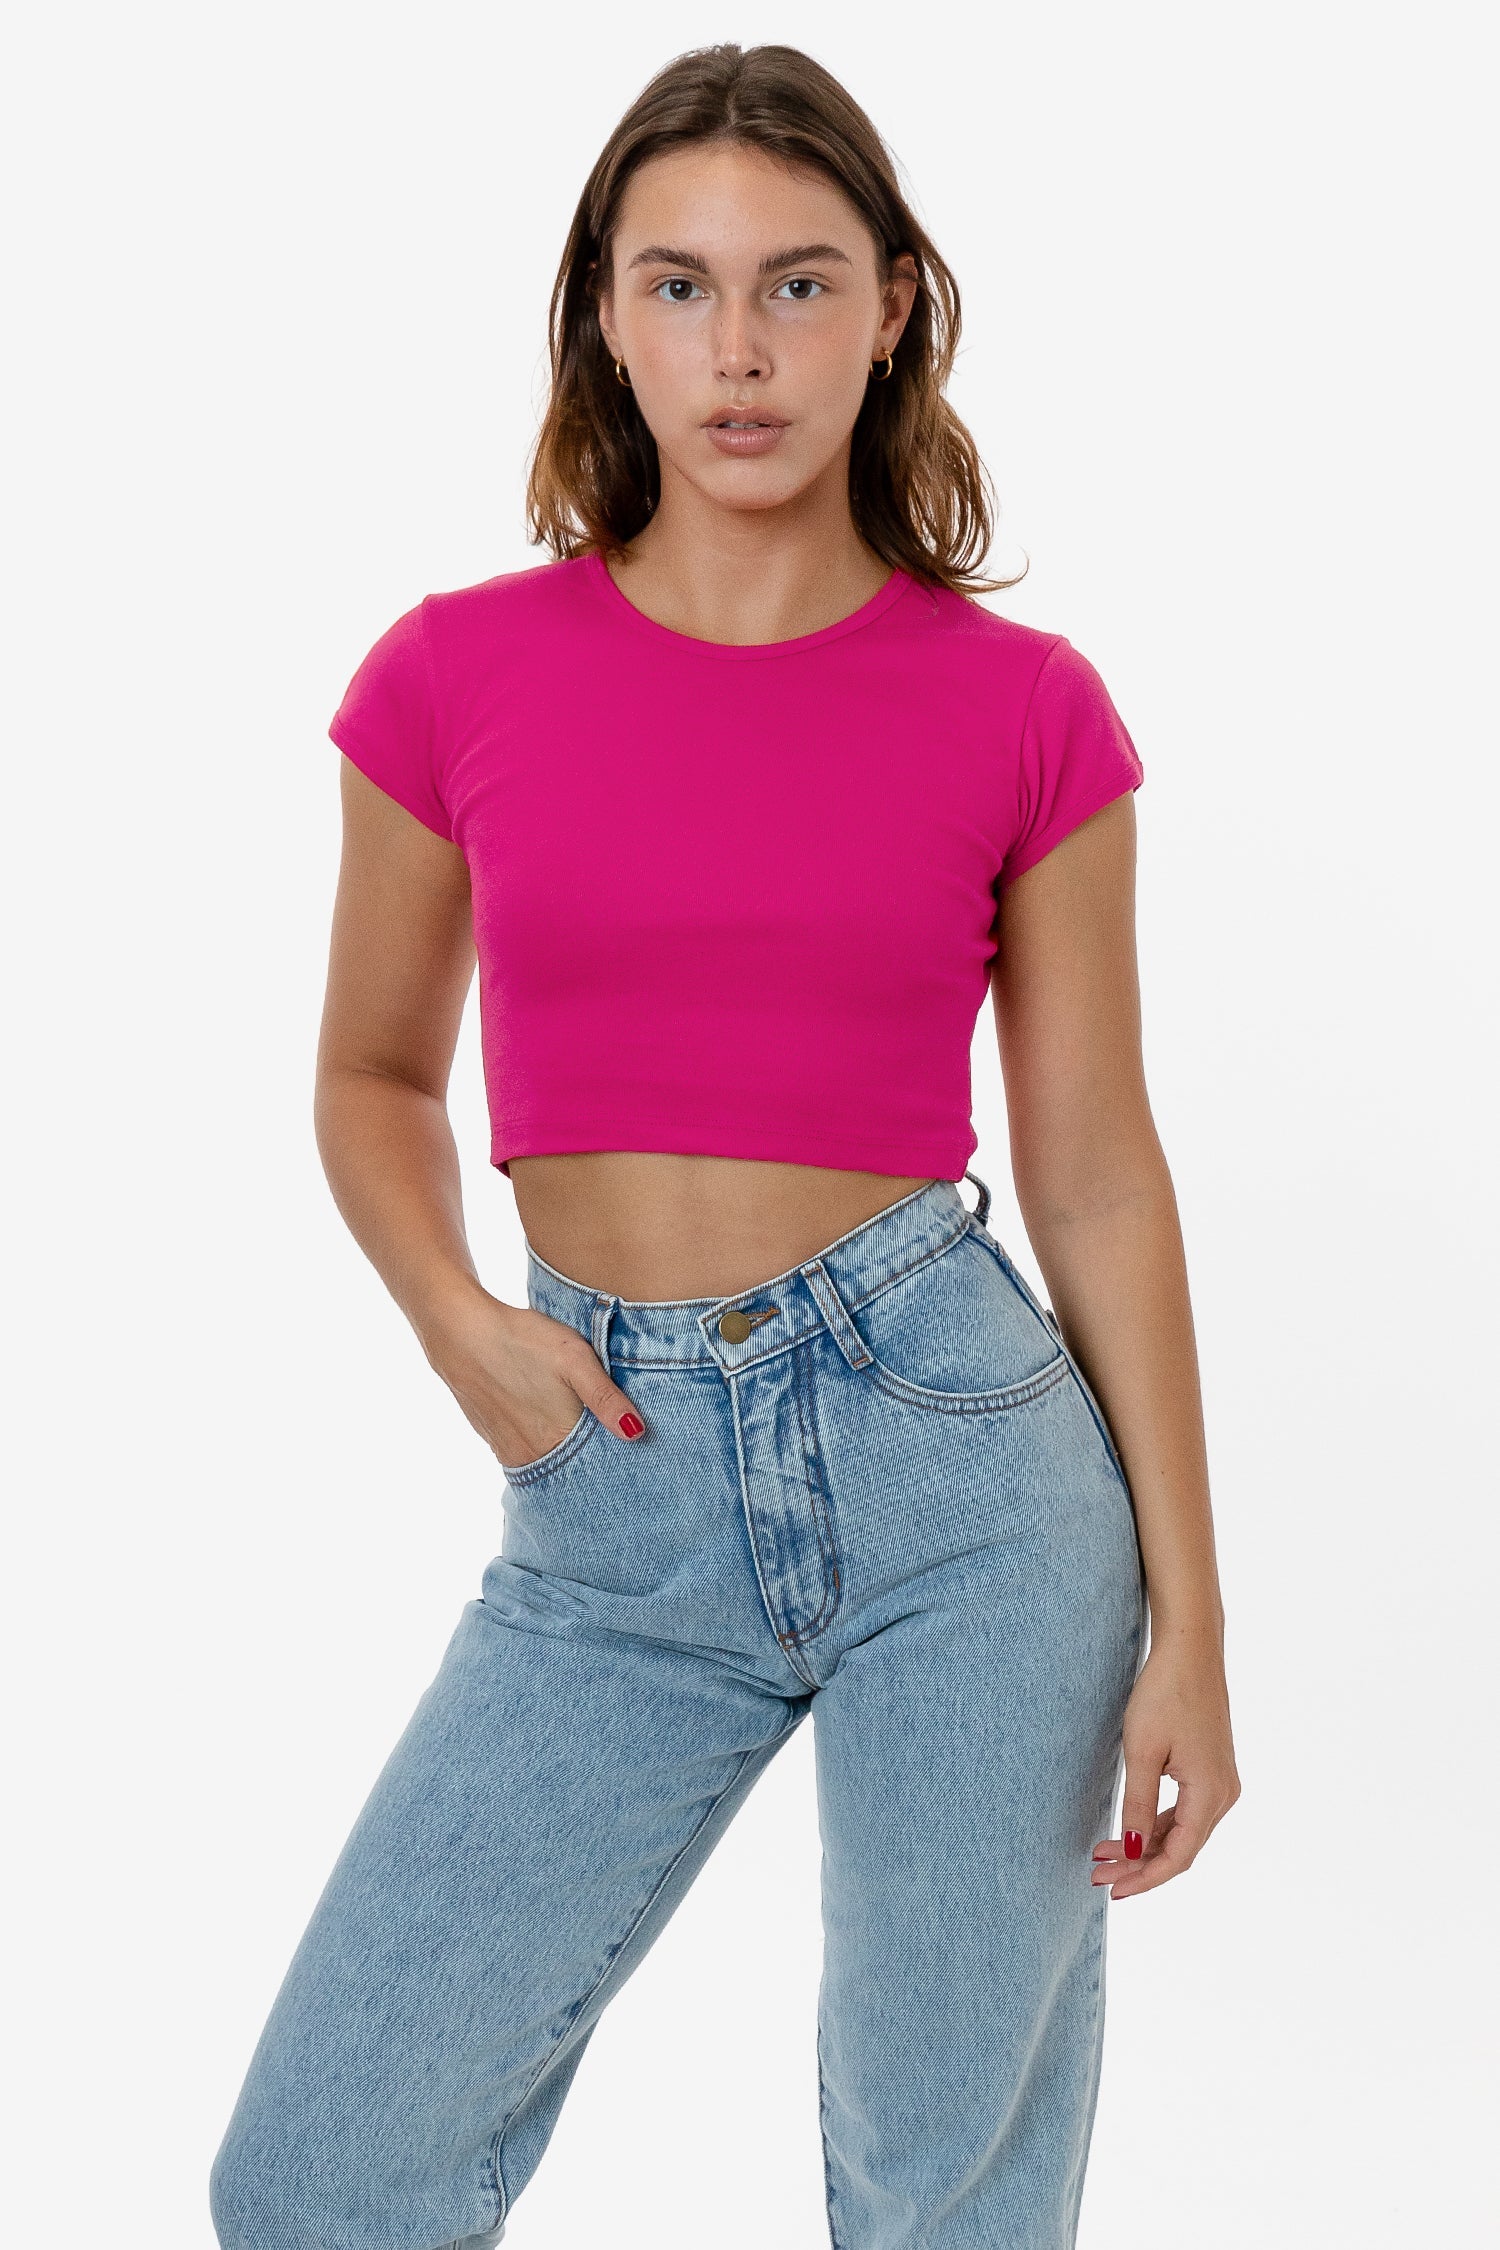 Half Sleeve Women Crop Tops T Shirts, Daily Wear at Rs 500/piece in Vapi